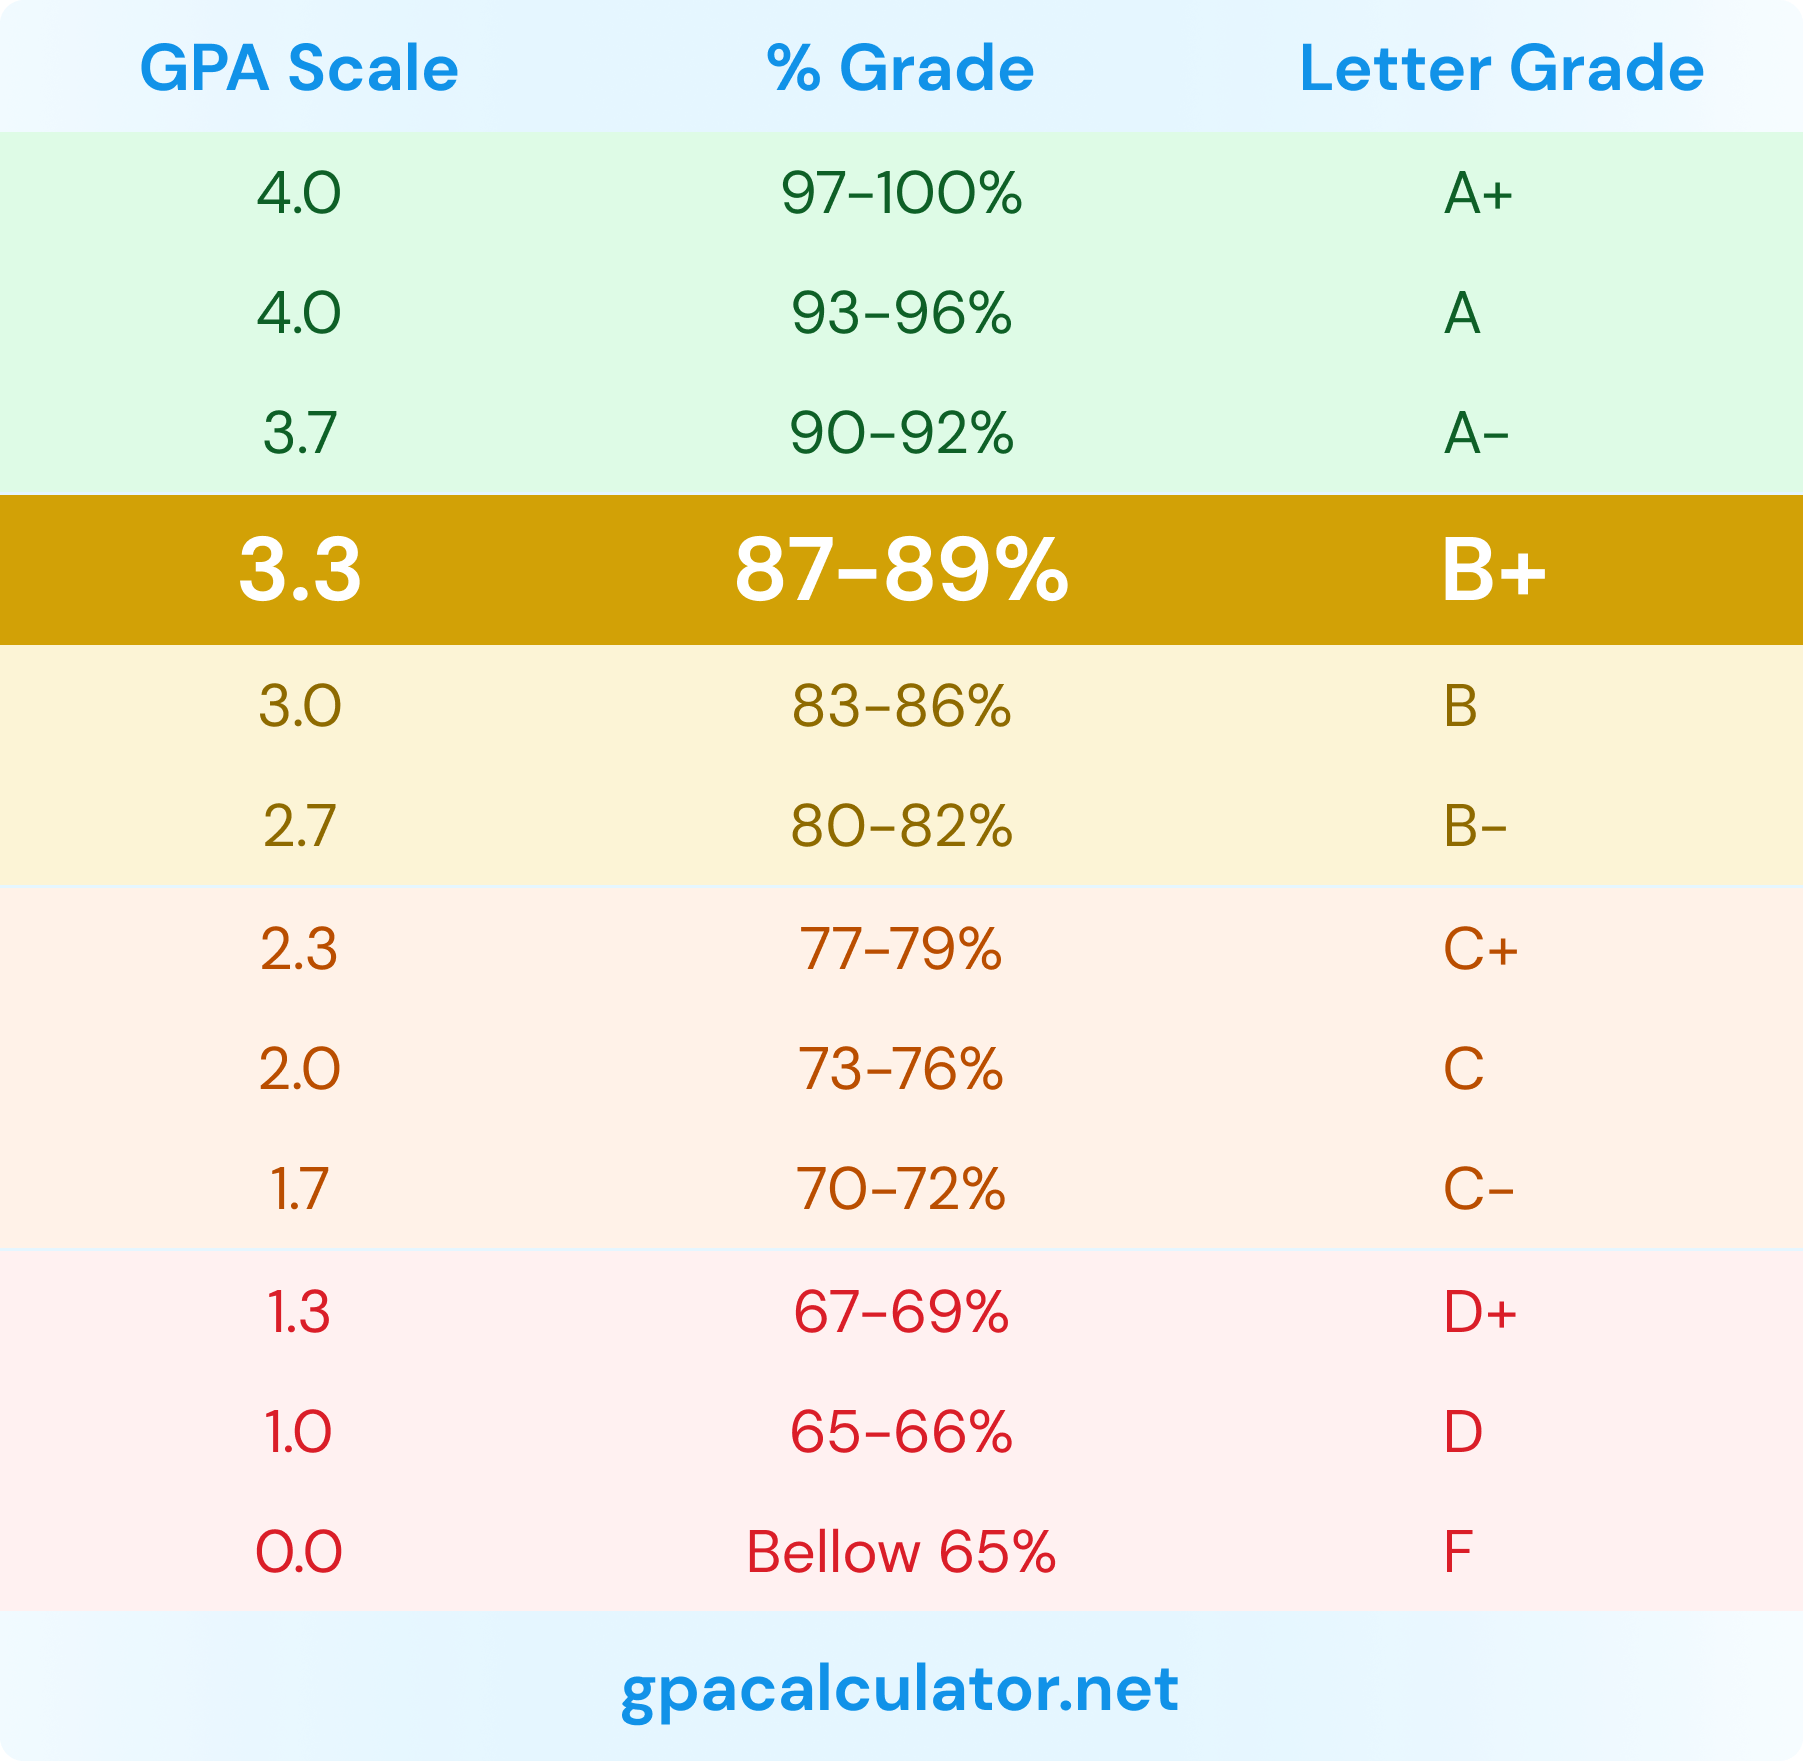 What GPA is an 88%?